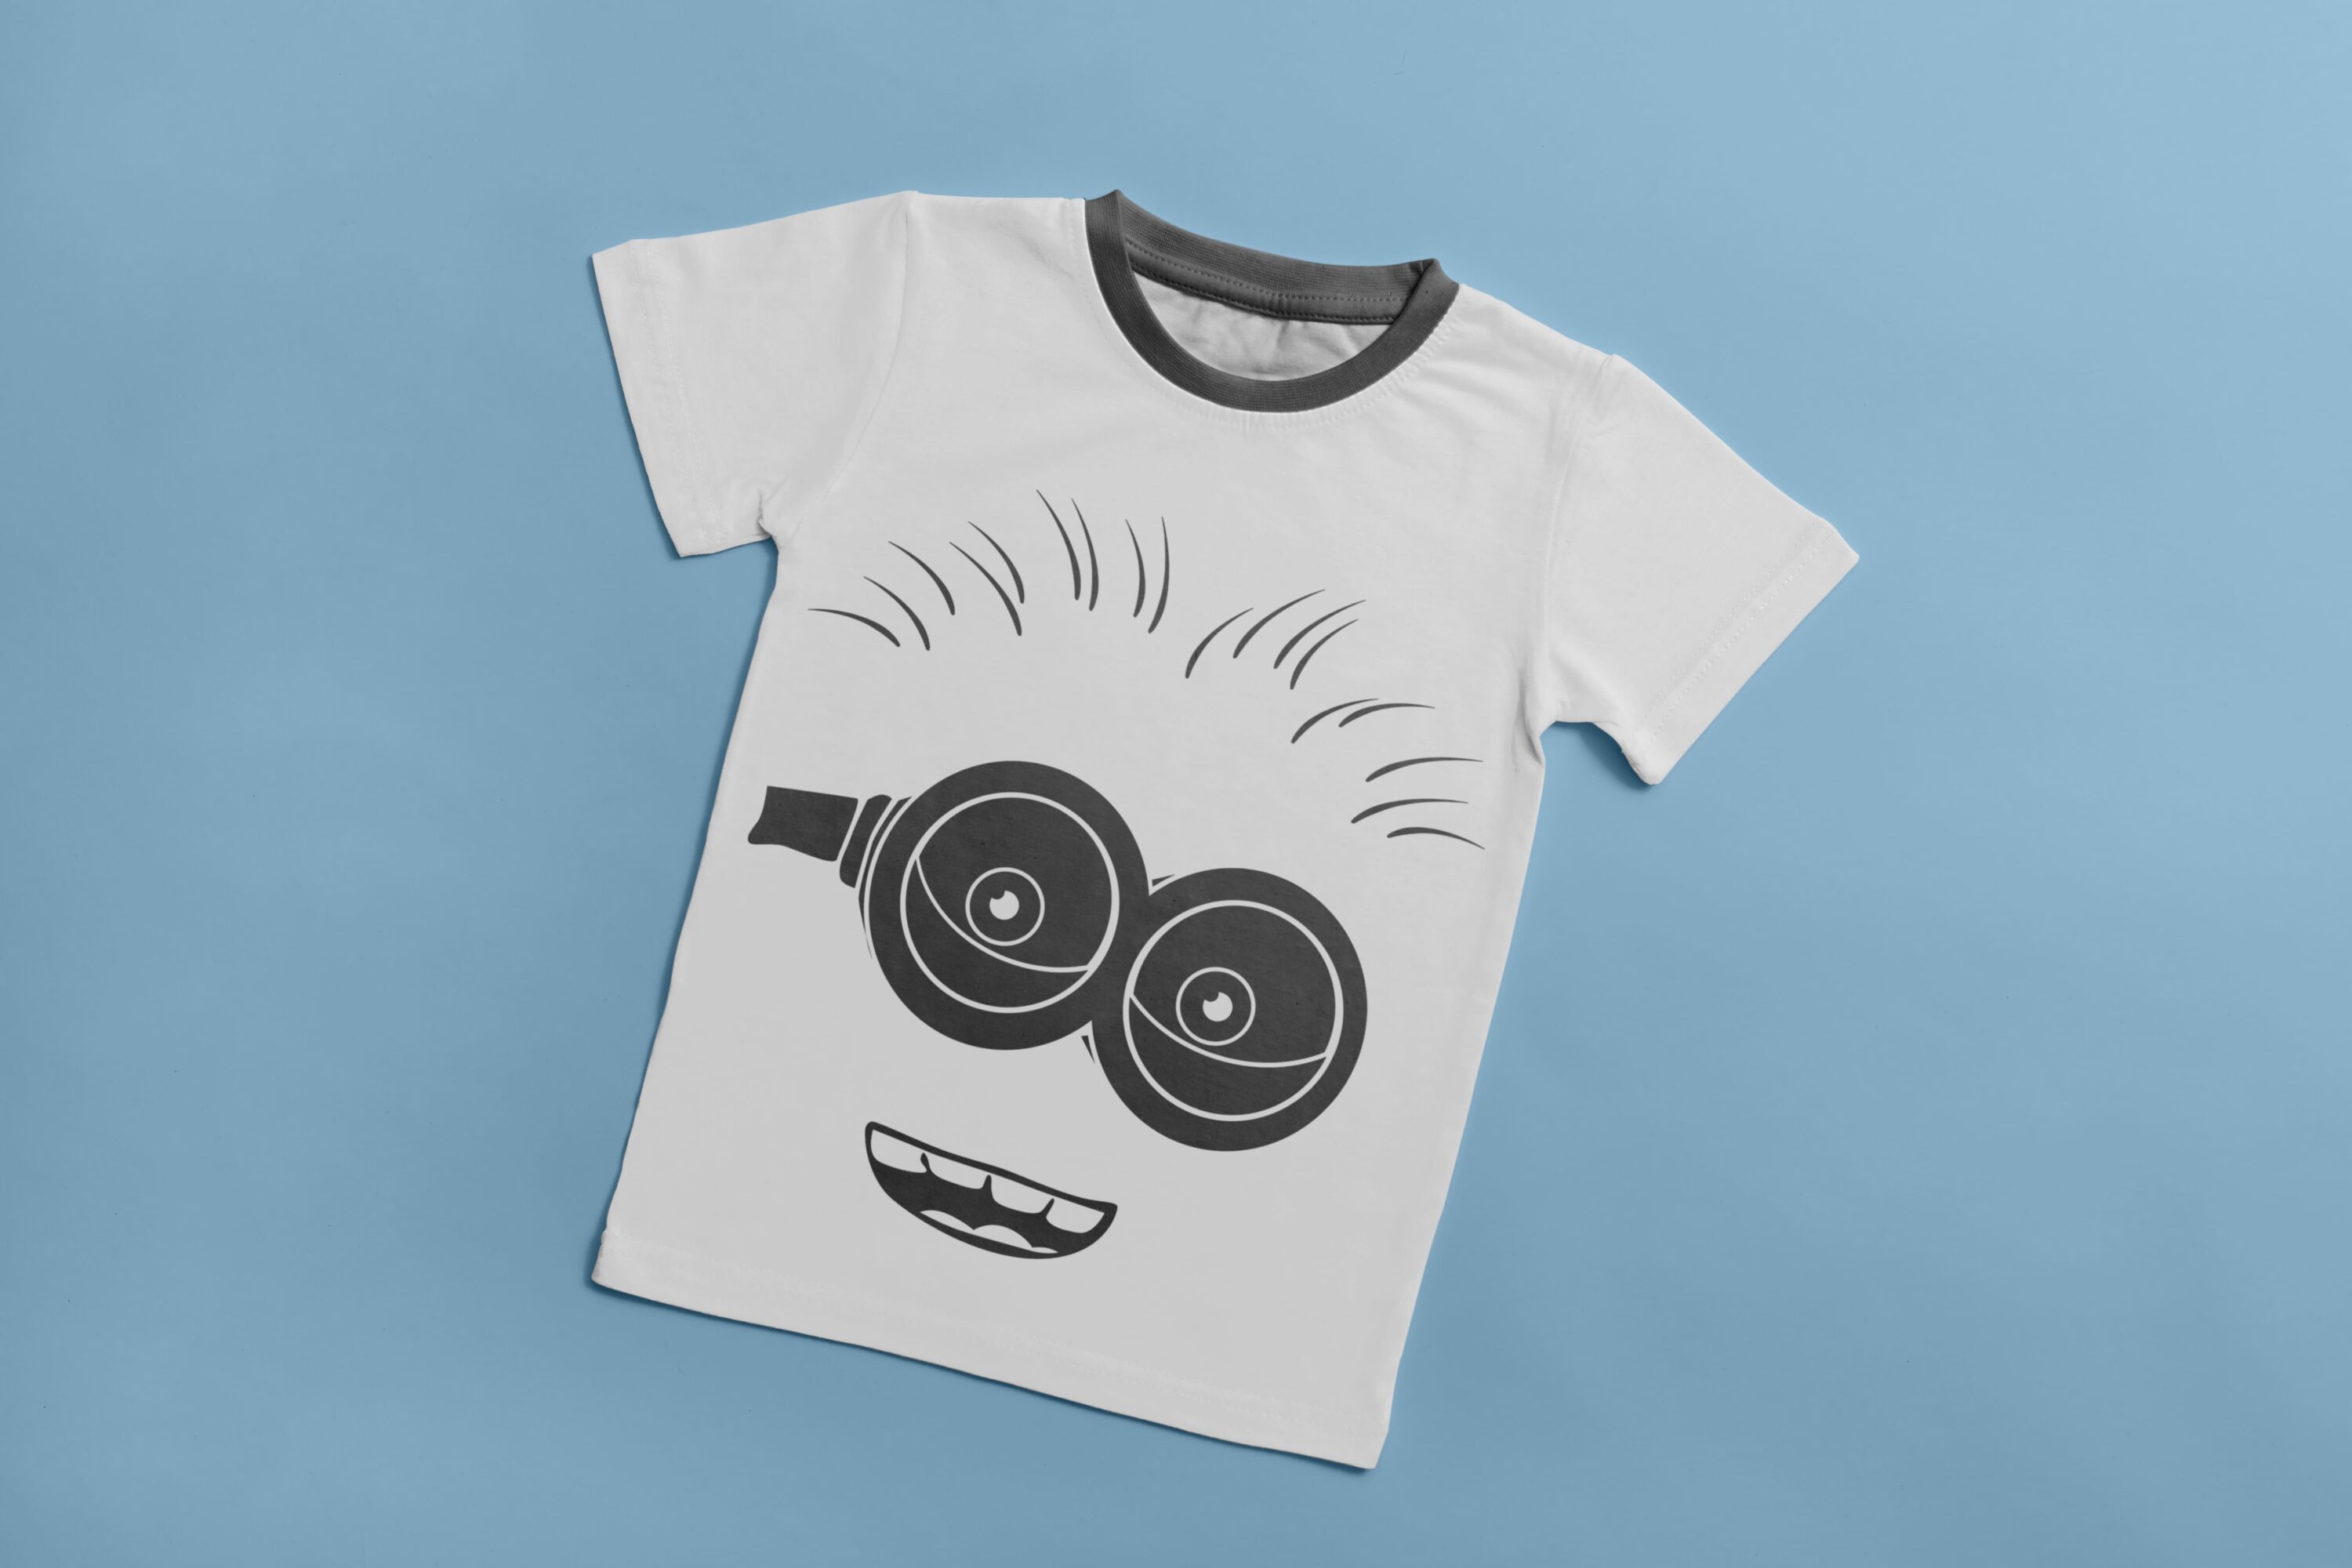 A white T-shirt with a gray collar and a gray silhouette of a laughing minion.